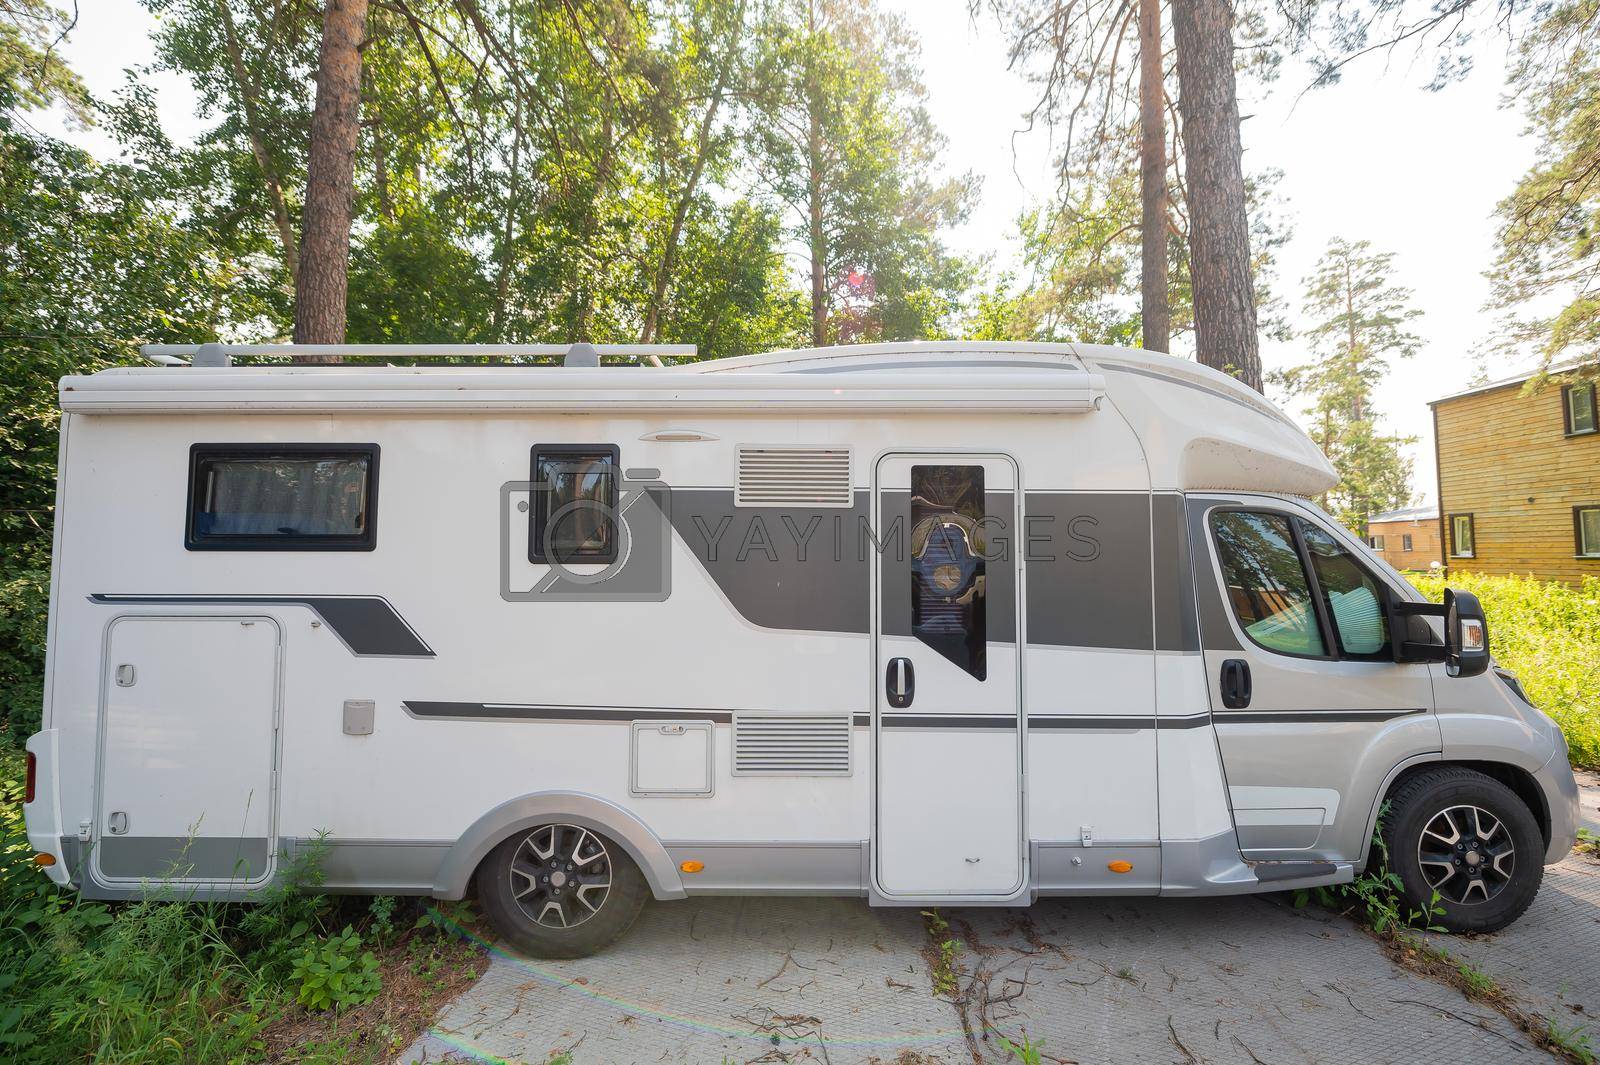 17 july 2020, Russia, Novosibirsk: A white mobile home is parked in the woods. Caravan for life and family road travel. No people